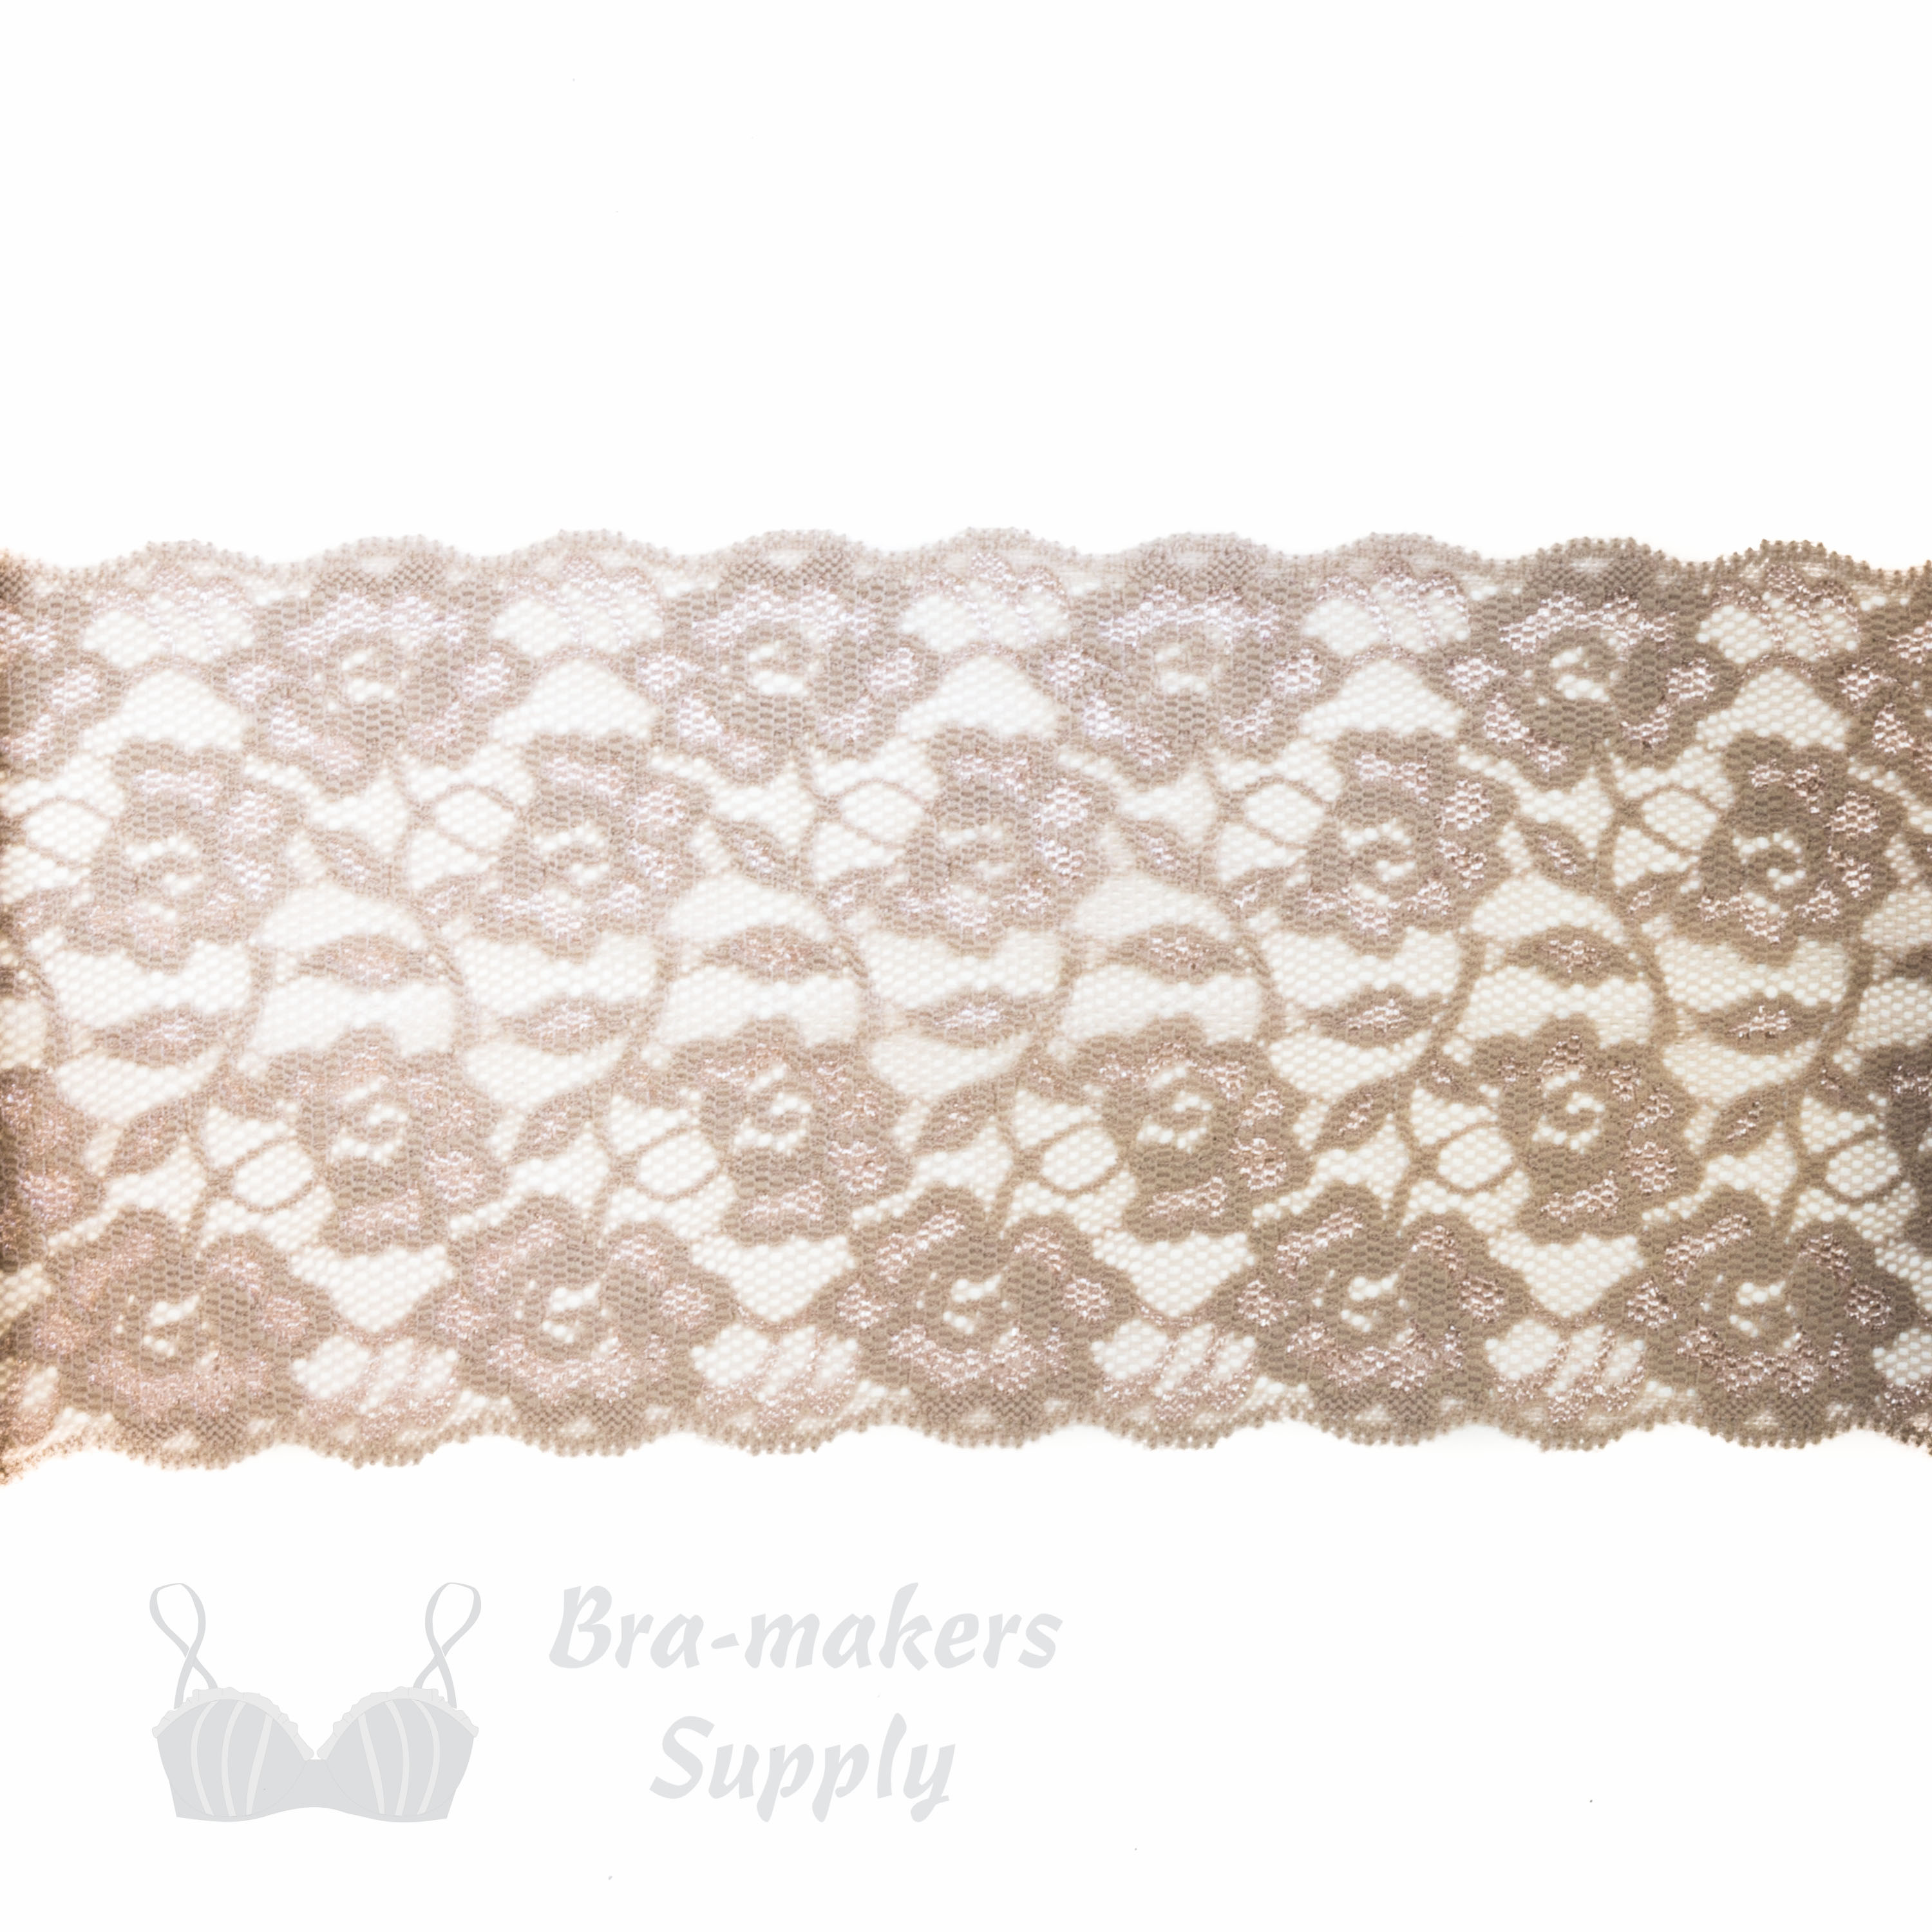 stretch laces - 5 inch - 13 cm five inch beige floral stretch lace LS-63 82 from Bra-Makers Supply